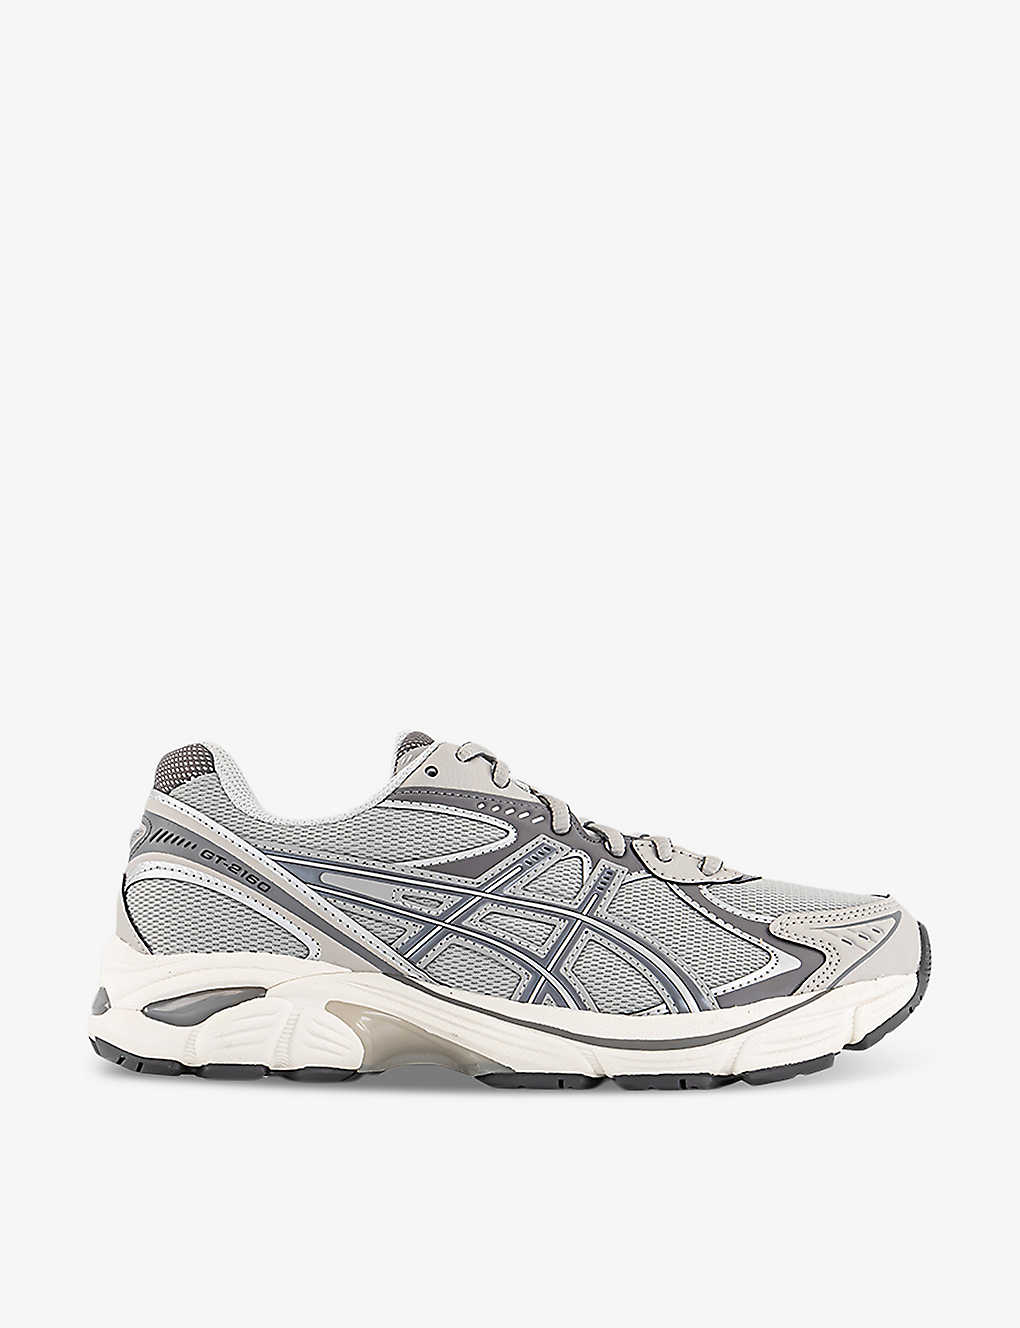 Asics Gt-2160 In Grey,carbon